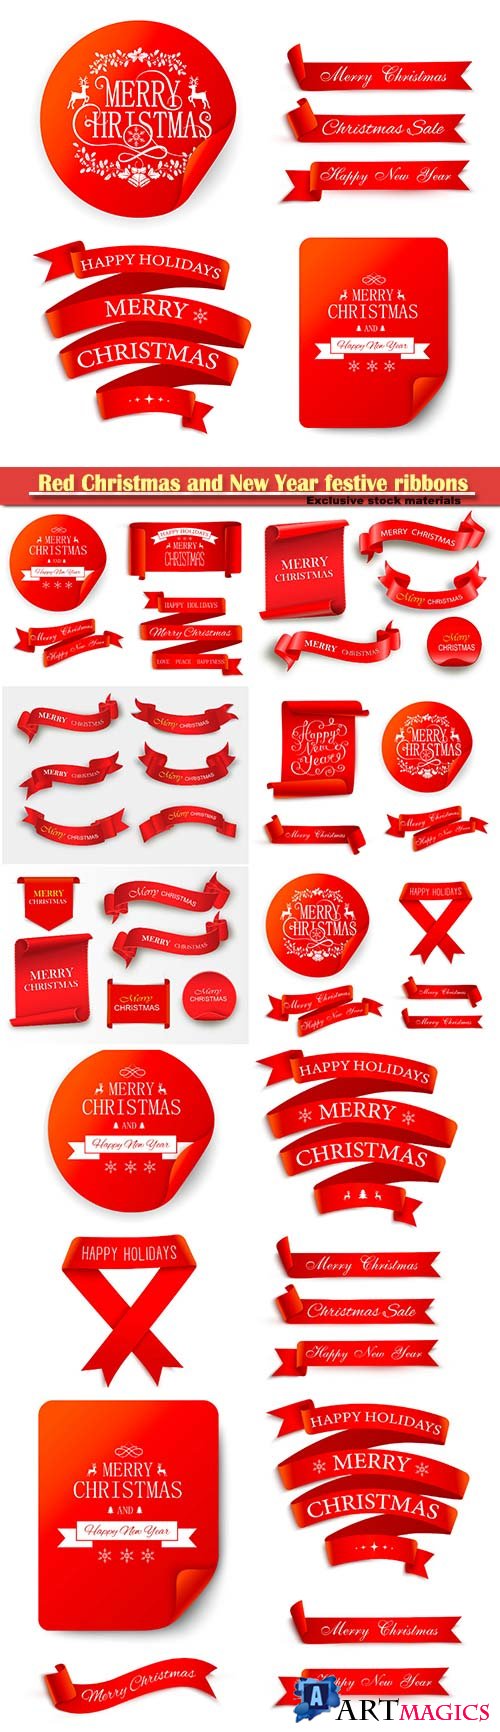 Red Christmas and New Year festive ribbons and vector stickers